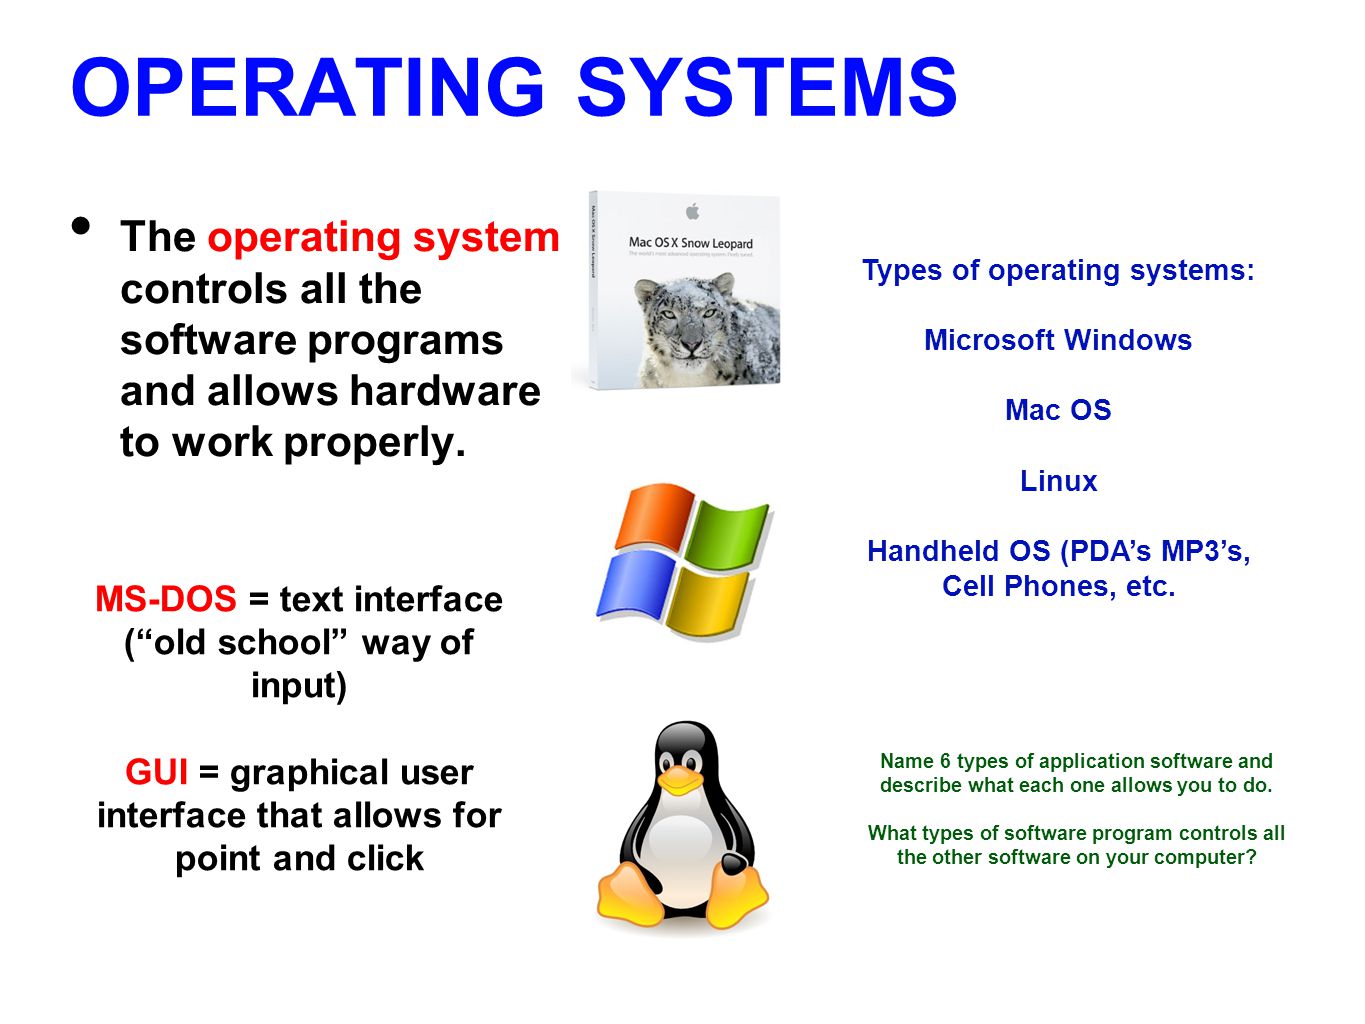 OPERATING SYSTEMS The operating system controls all the software programs and allows hardware to work properly.